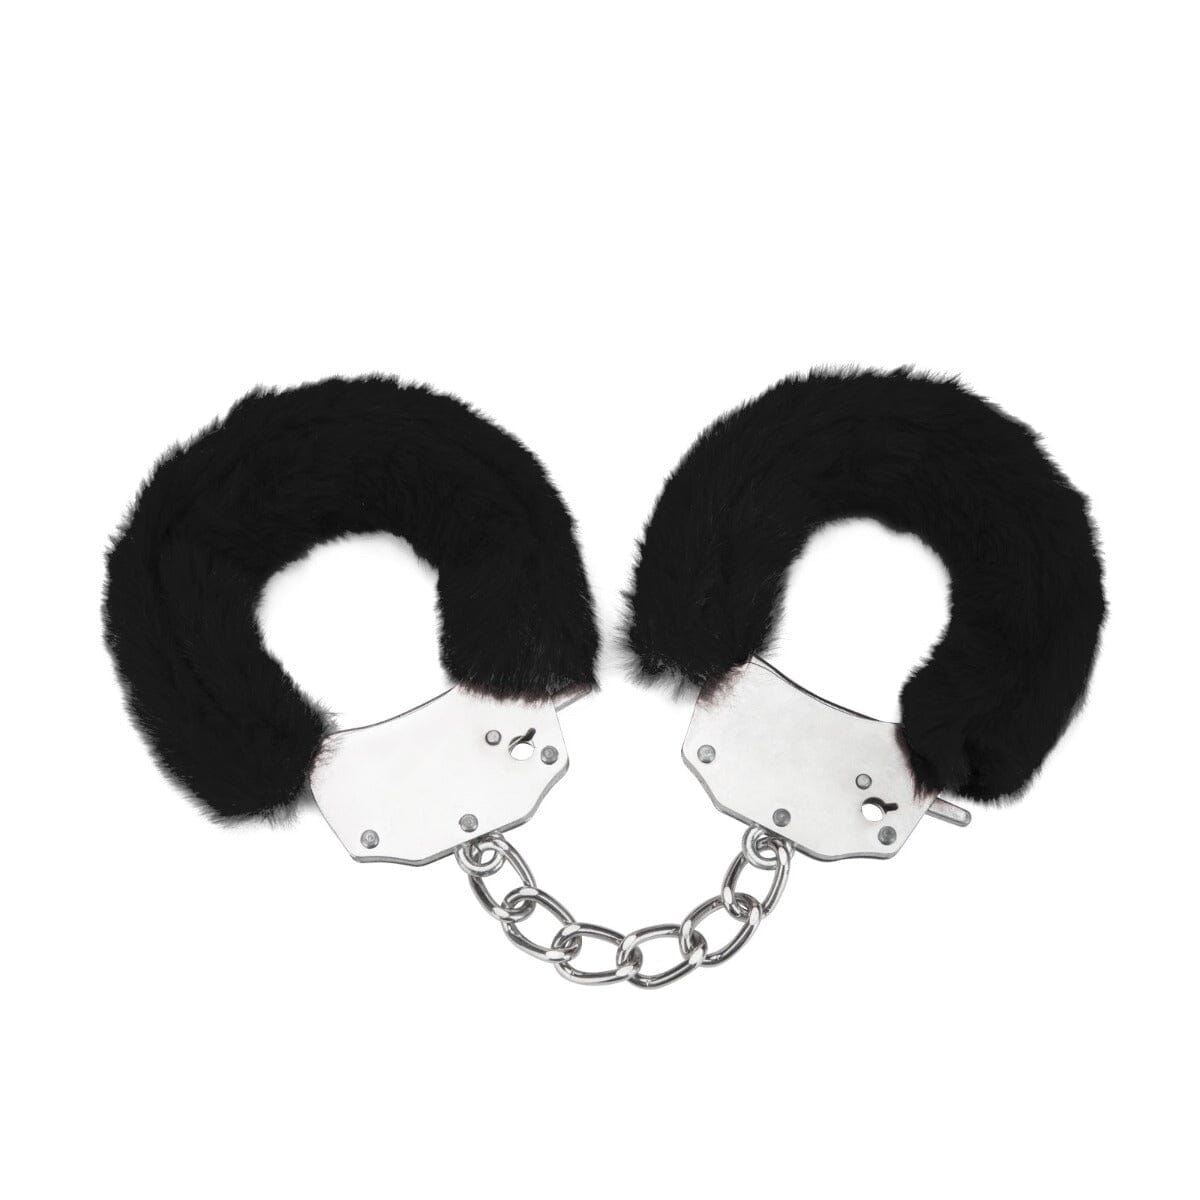 a pair of handcuffs with chains attached to them